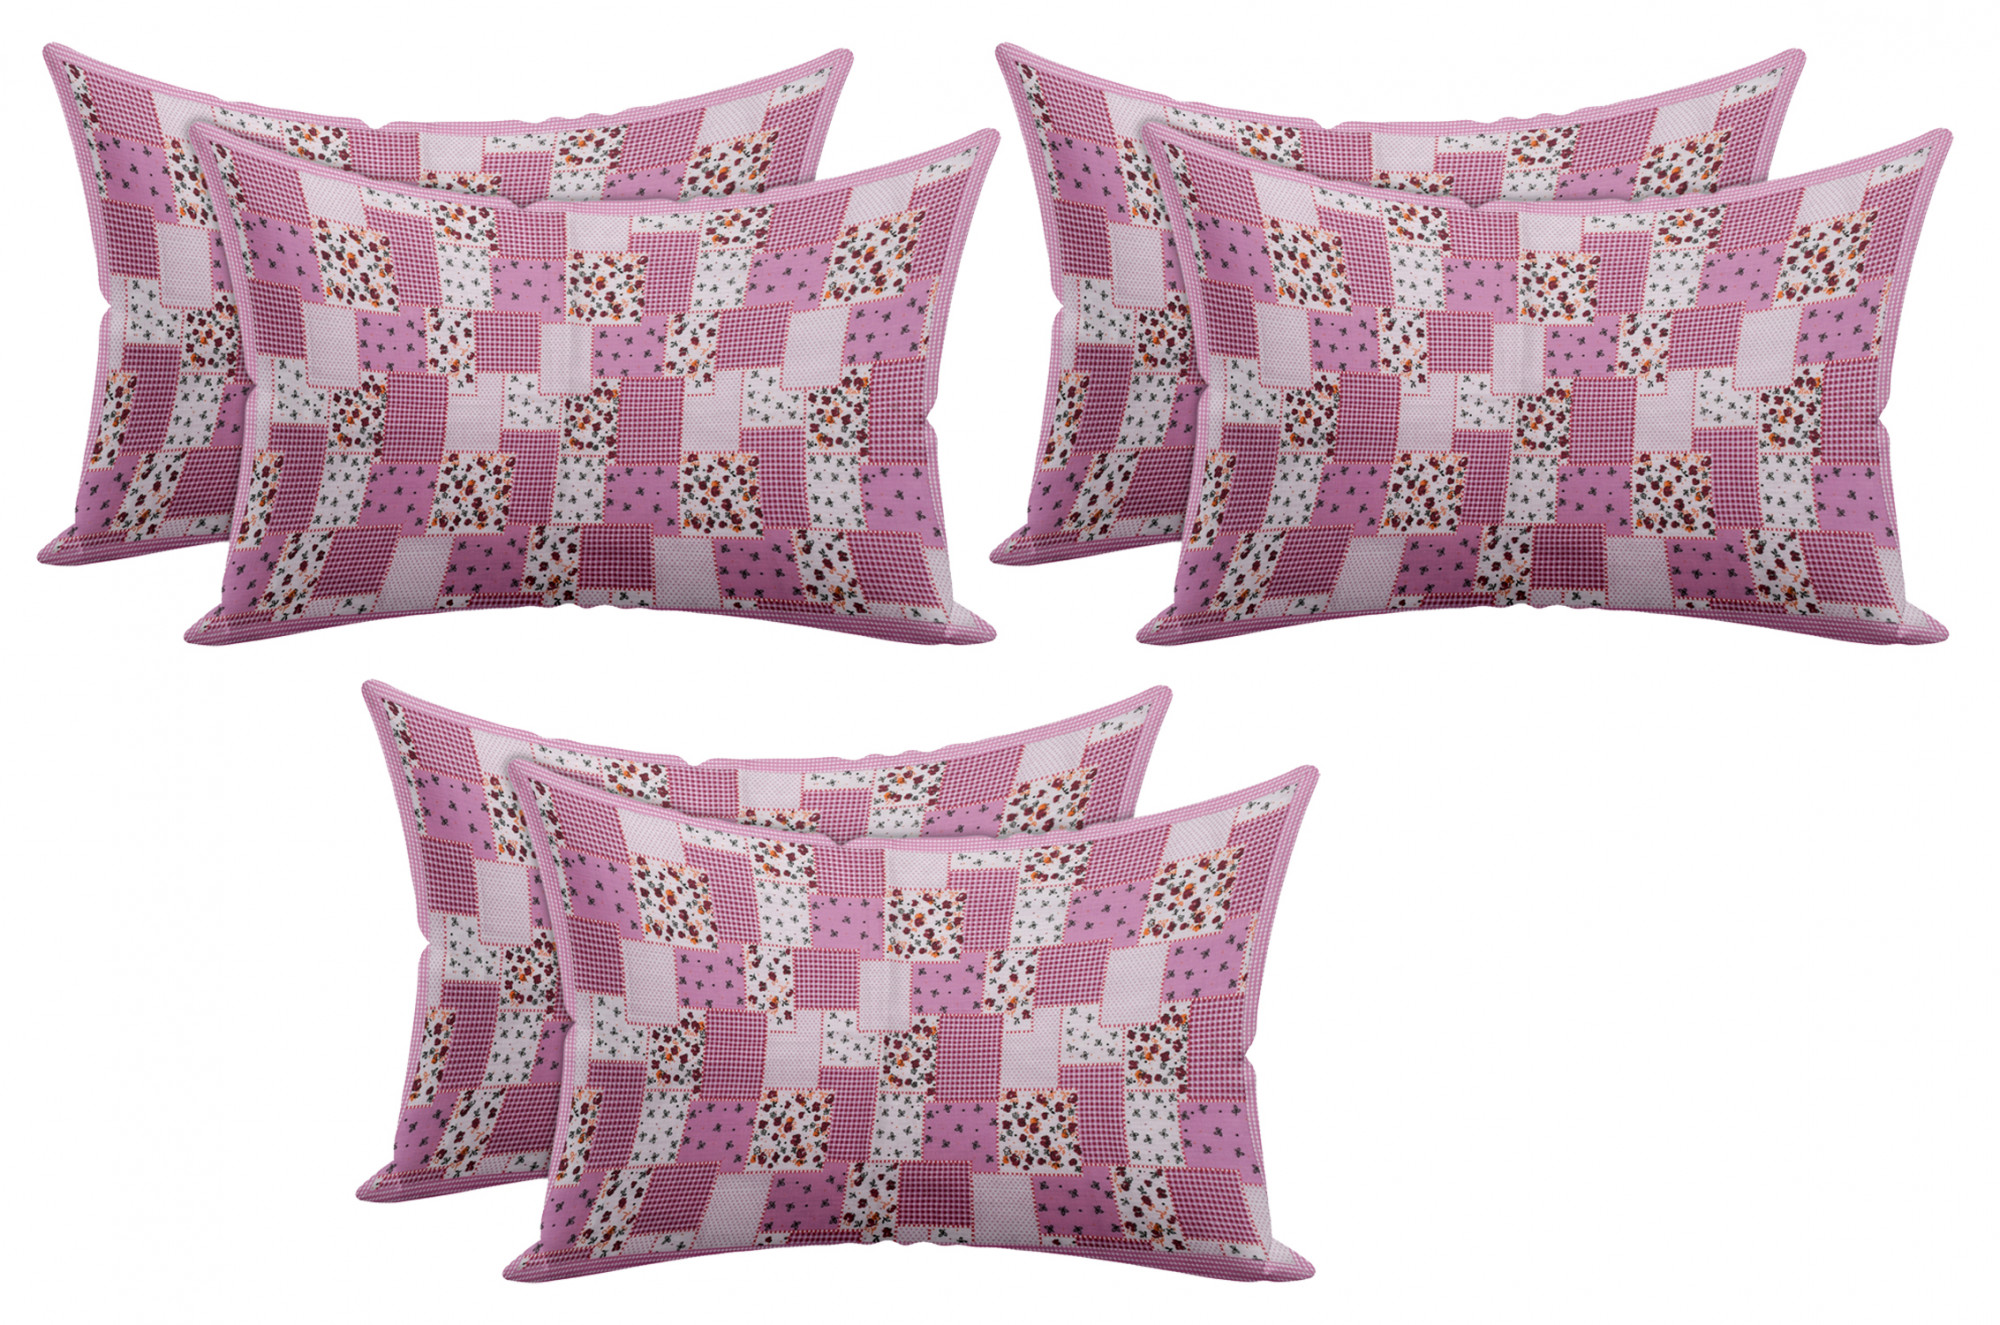 Kuber Industries Check Design Premium Cotton Pillow Covers, 18 x 28 inch,(Pink)